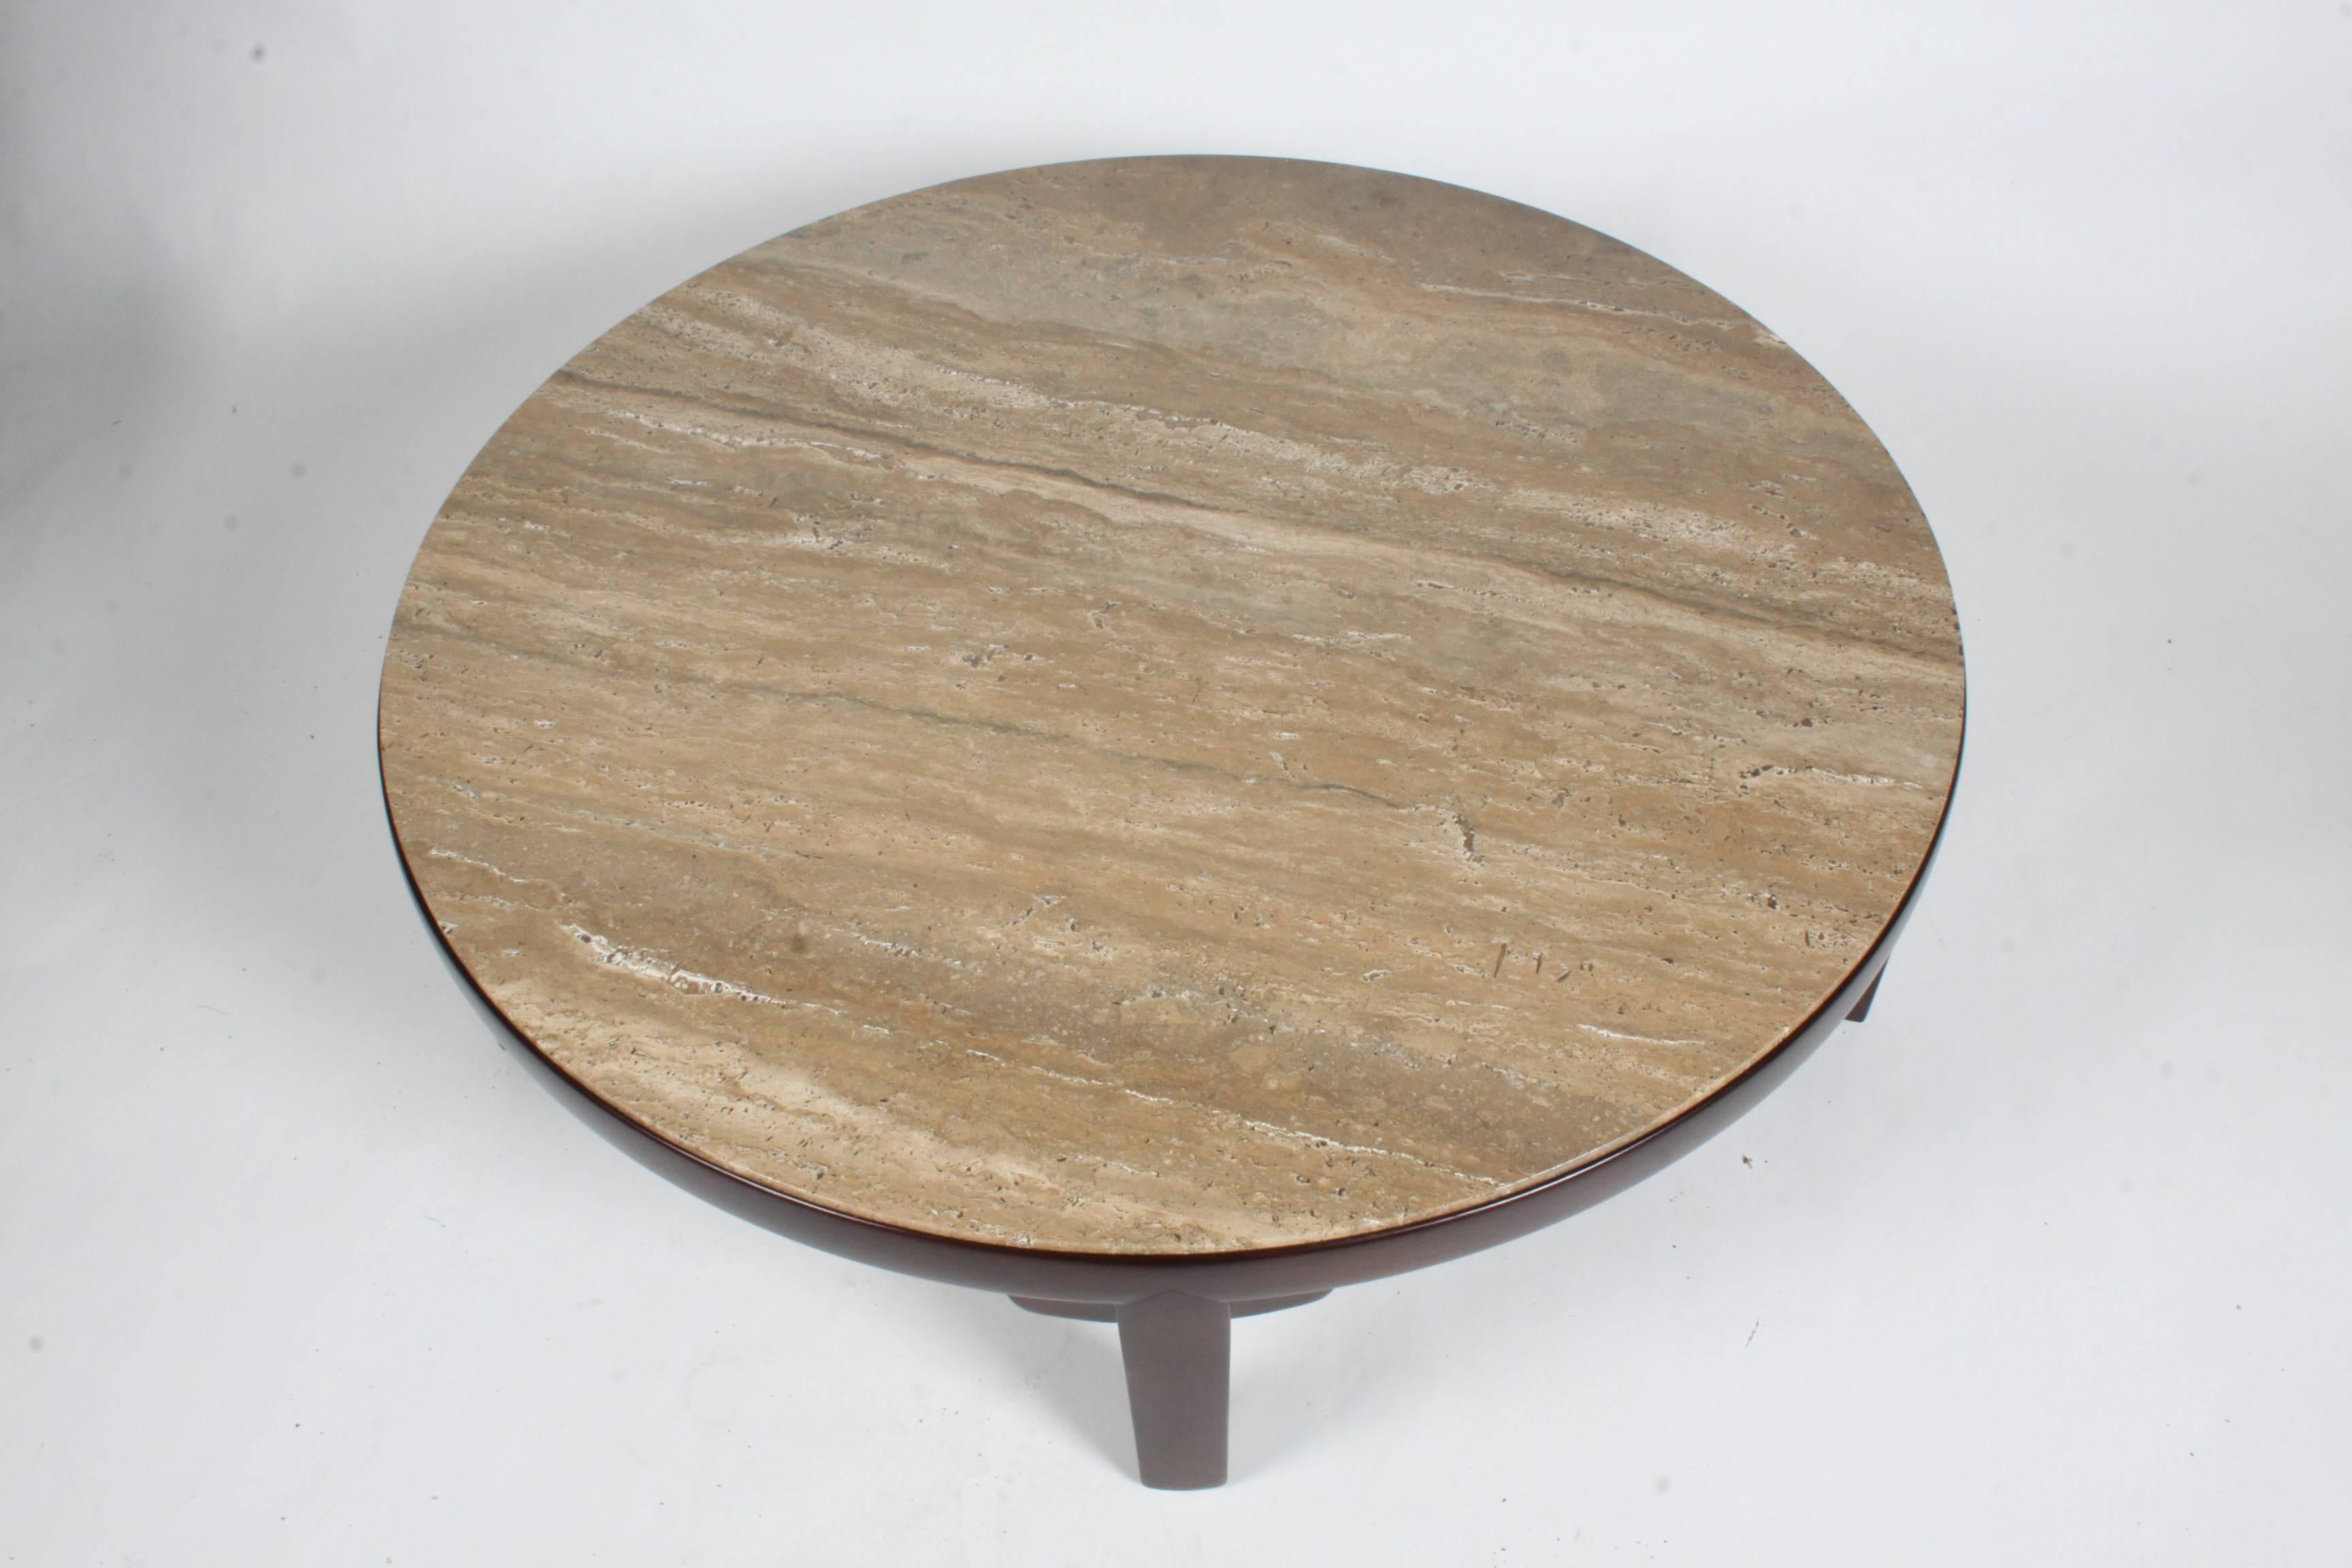 Beautiful large Edward Wormley for Dunbar Asian influenced round coffee table. Original walnut Roman travertine top that is marked made in Italy. Mahogany base has been refinished to match the original color. Marked with brass Dunbar tag. Excellent